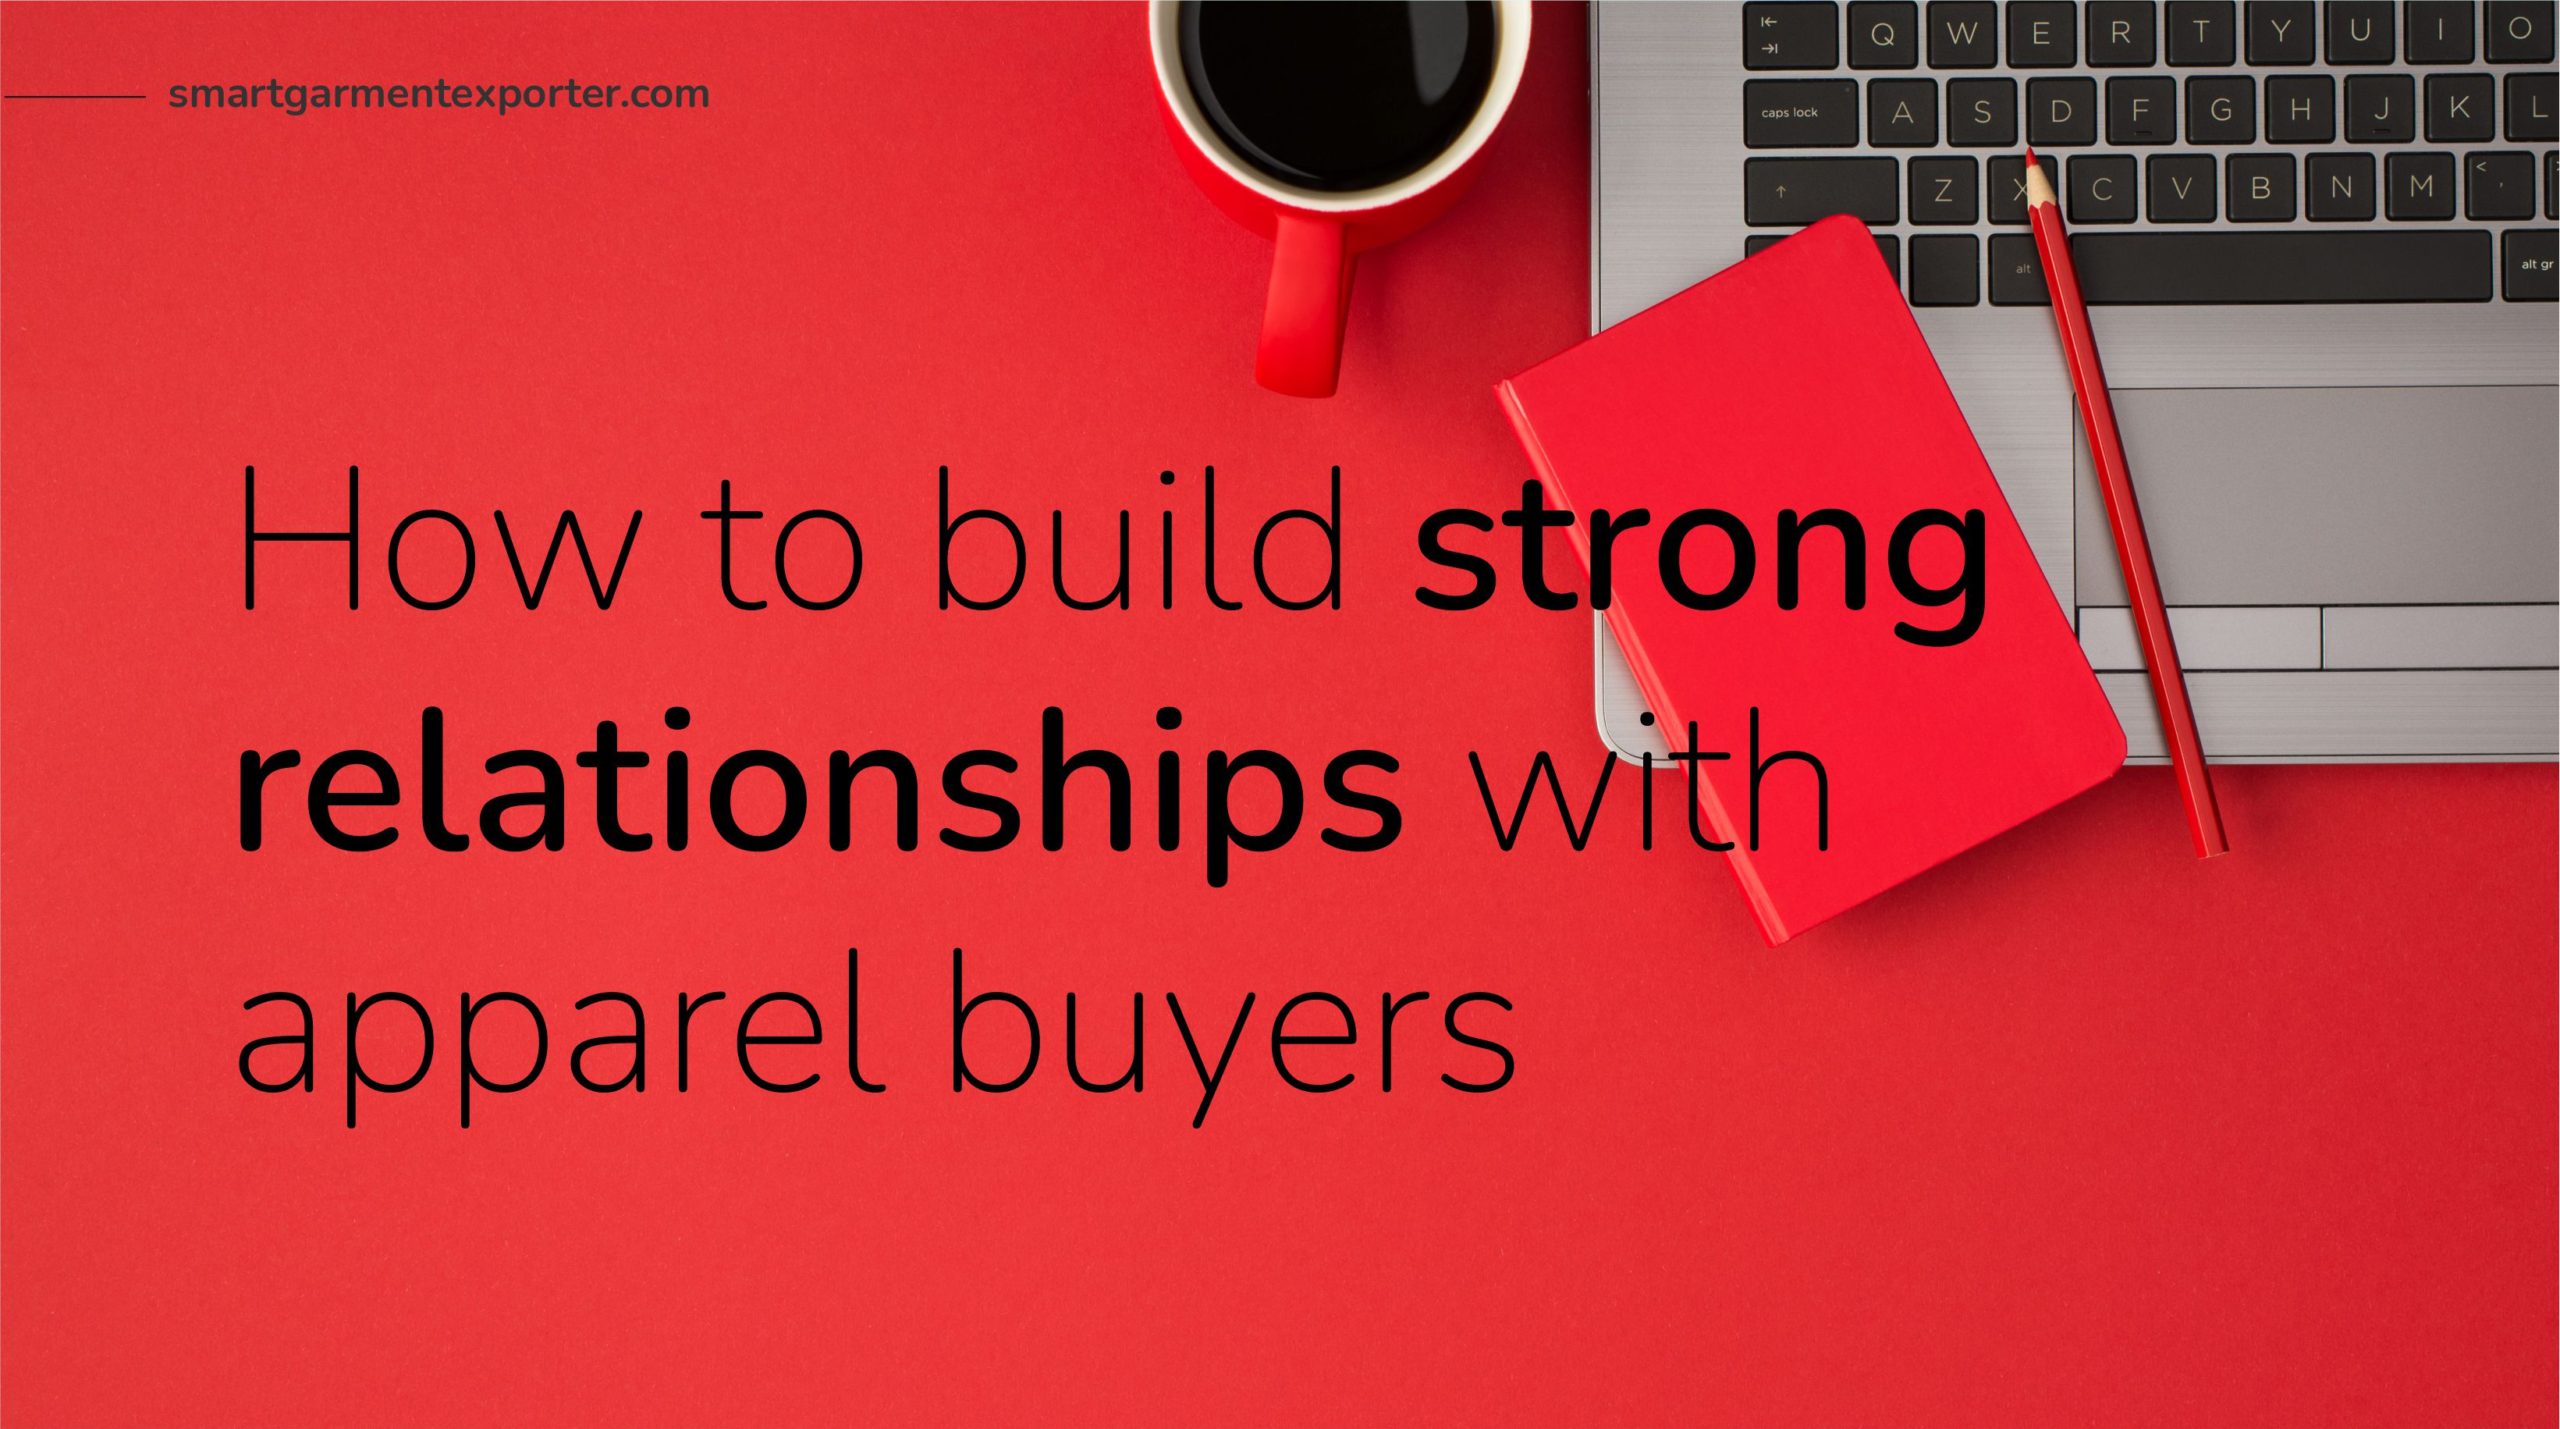 How to build strong relationships with apparel buyers